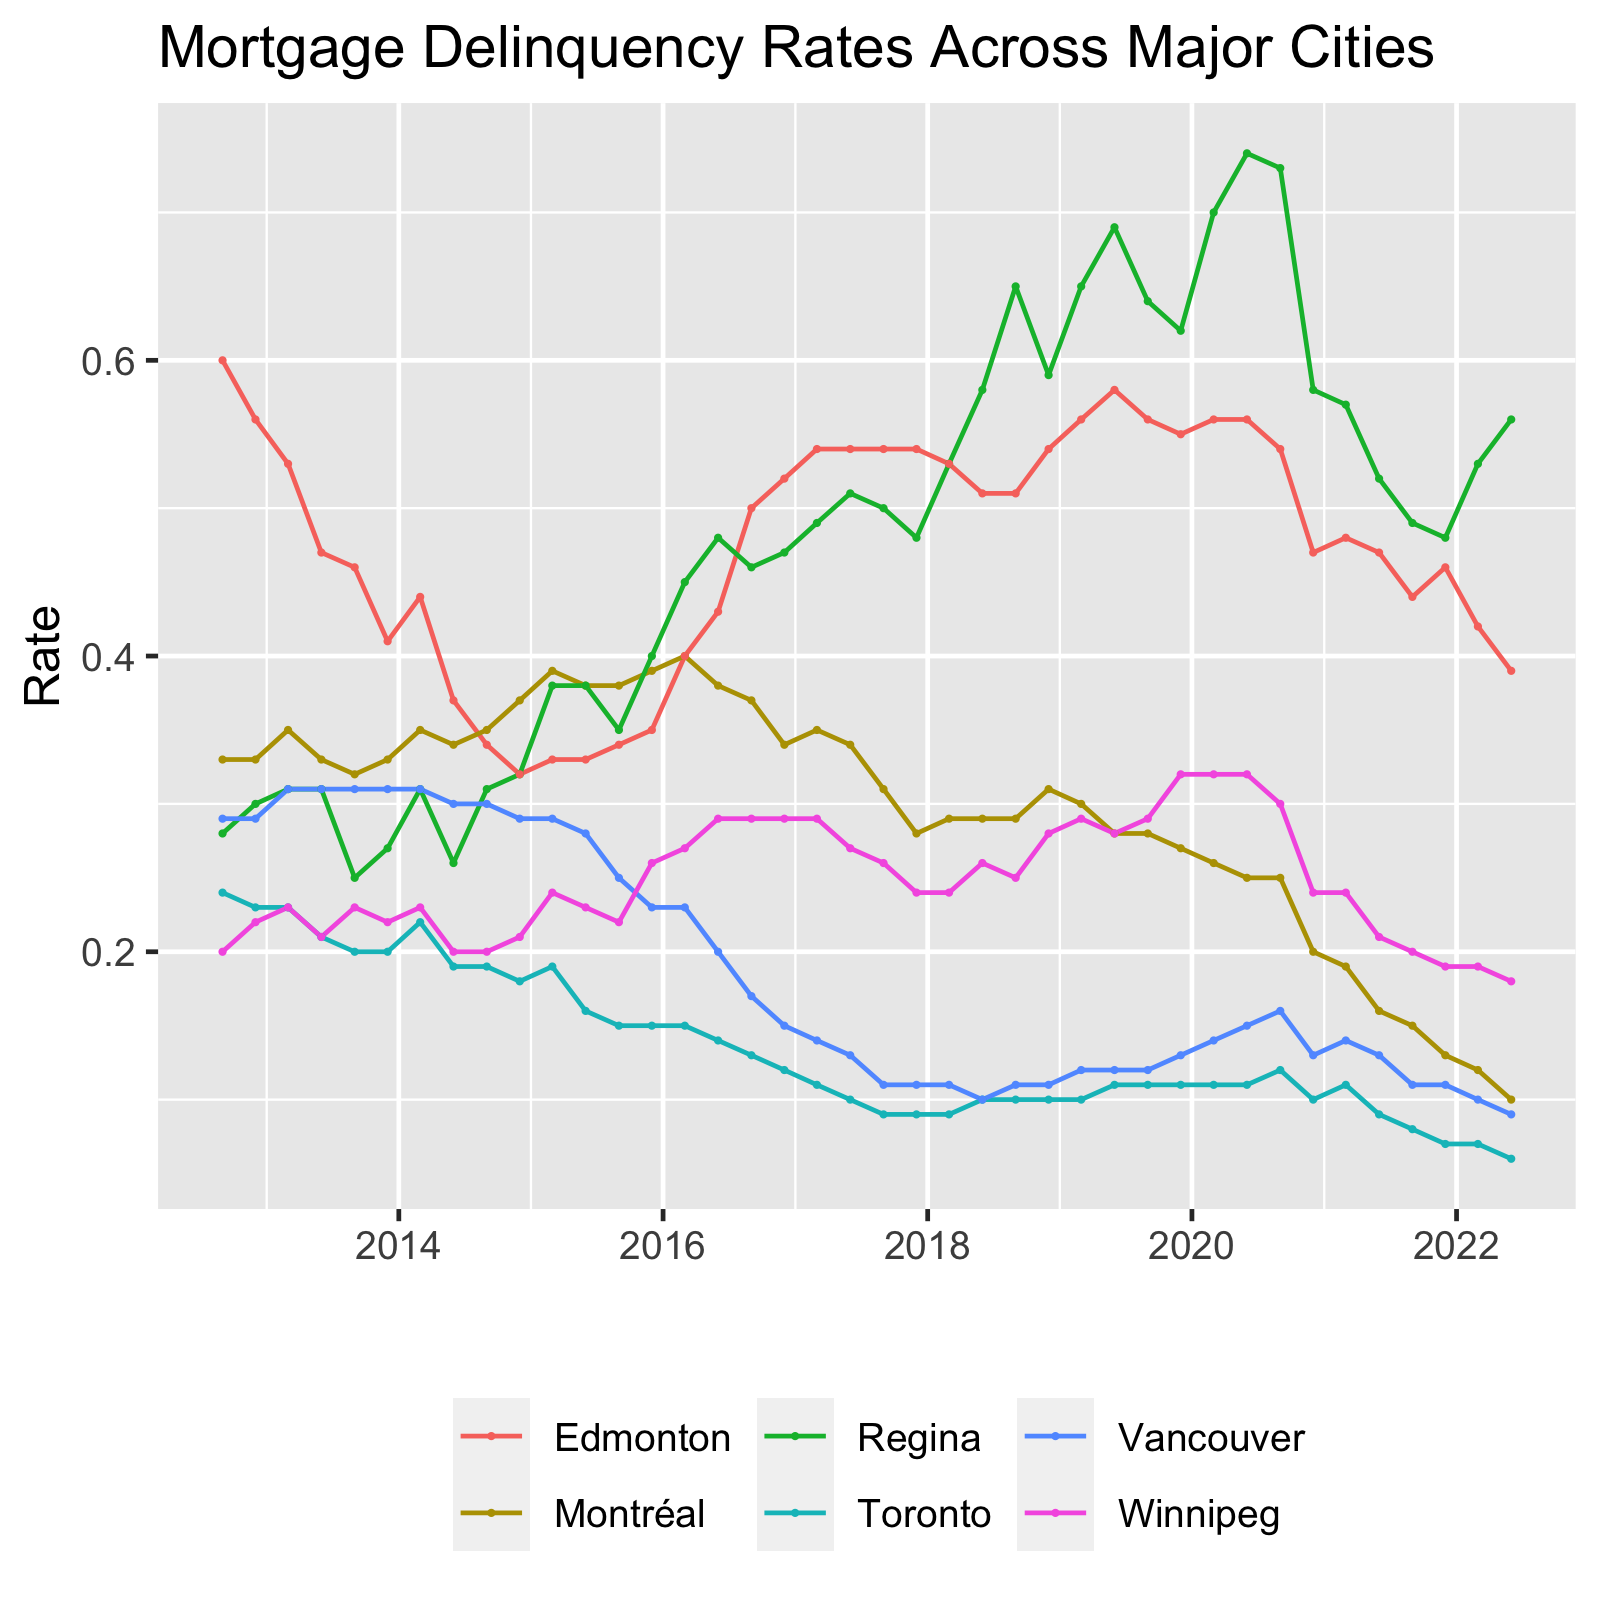 Line graph for Mortgage Delinquency Rates for Canadian Cities